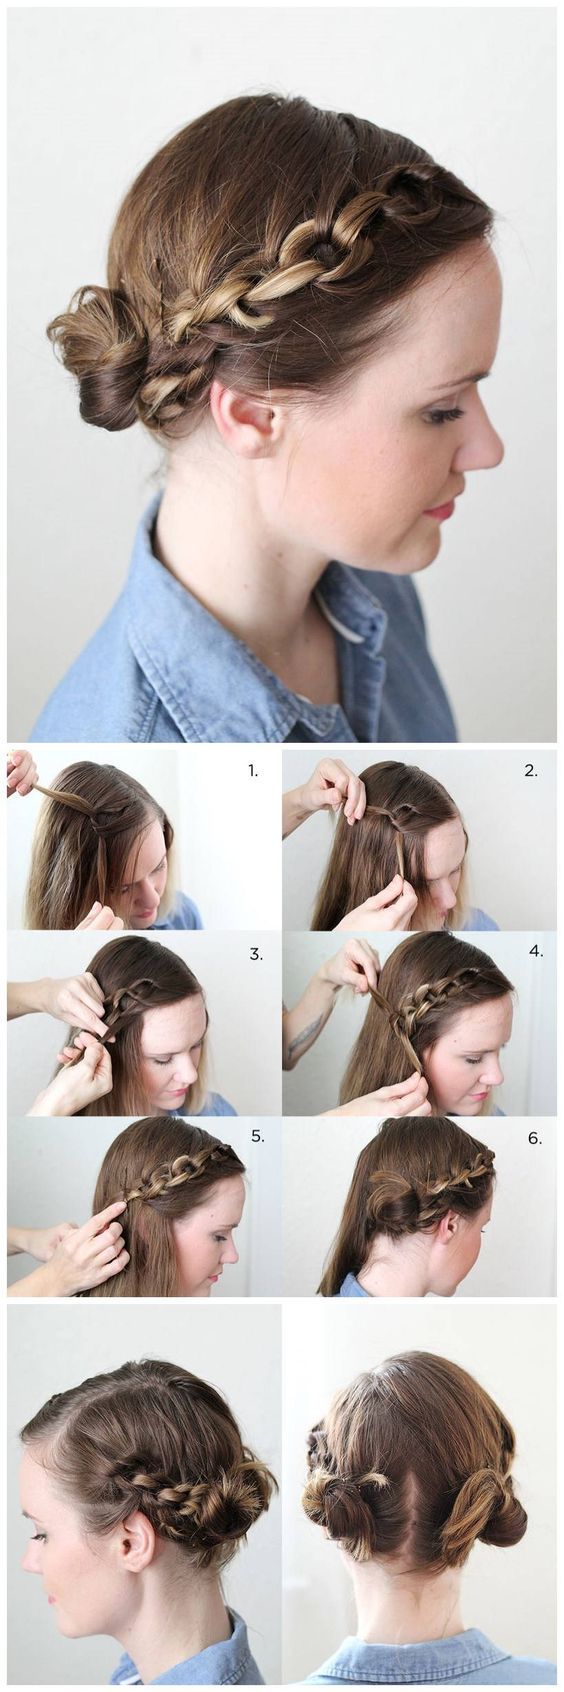 4 Cute Hairstyles for Spring! Check the Hair Tutorials Here